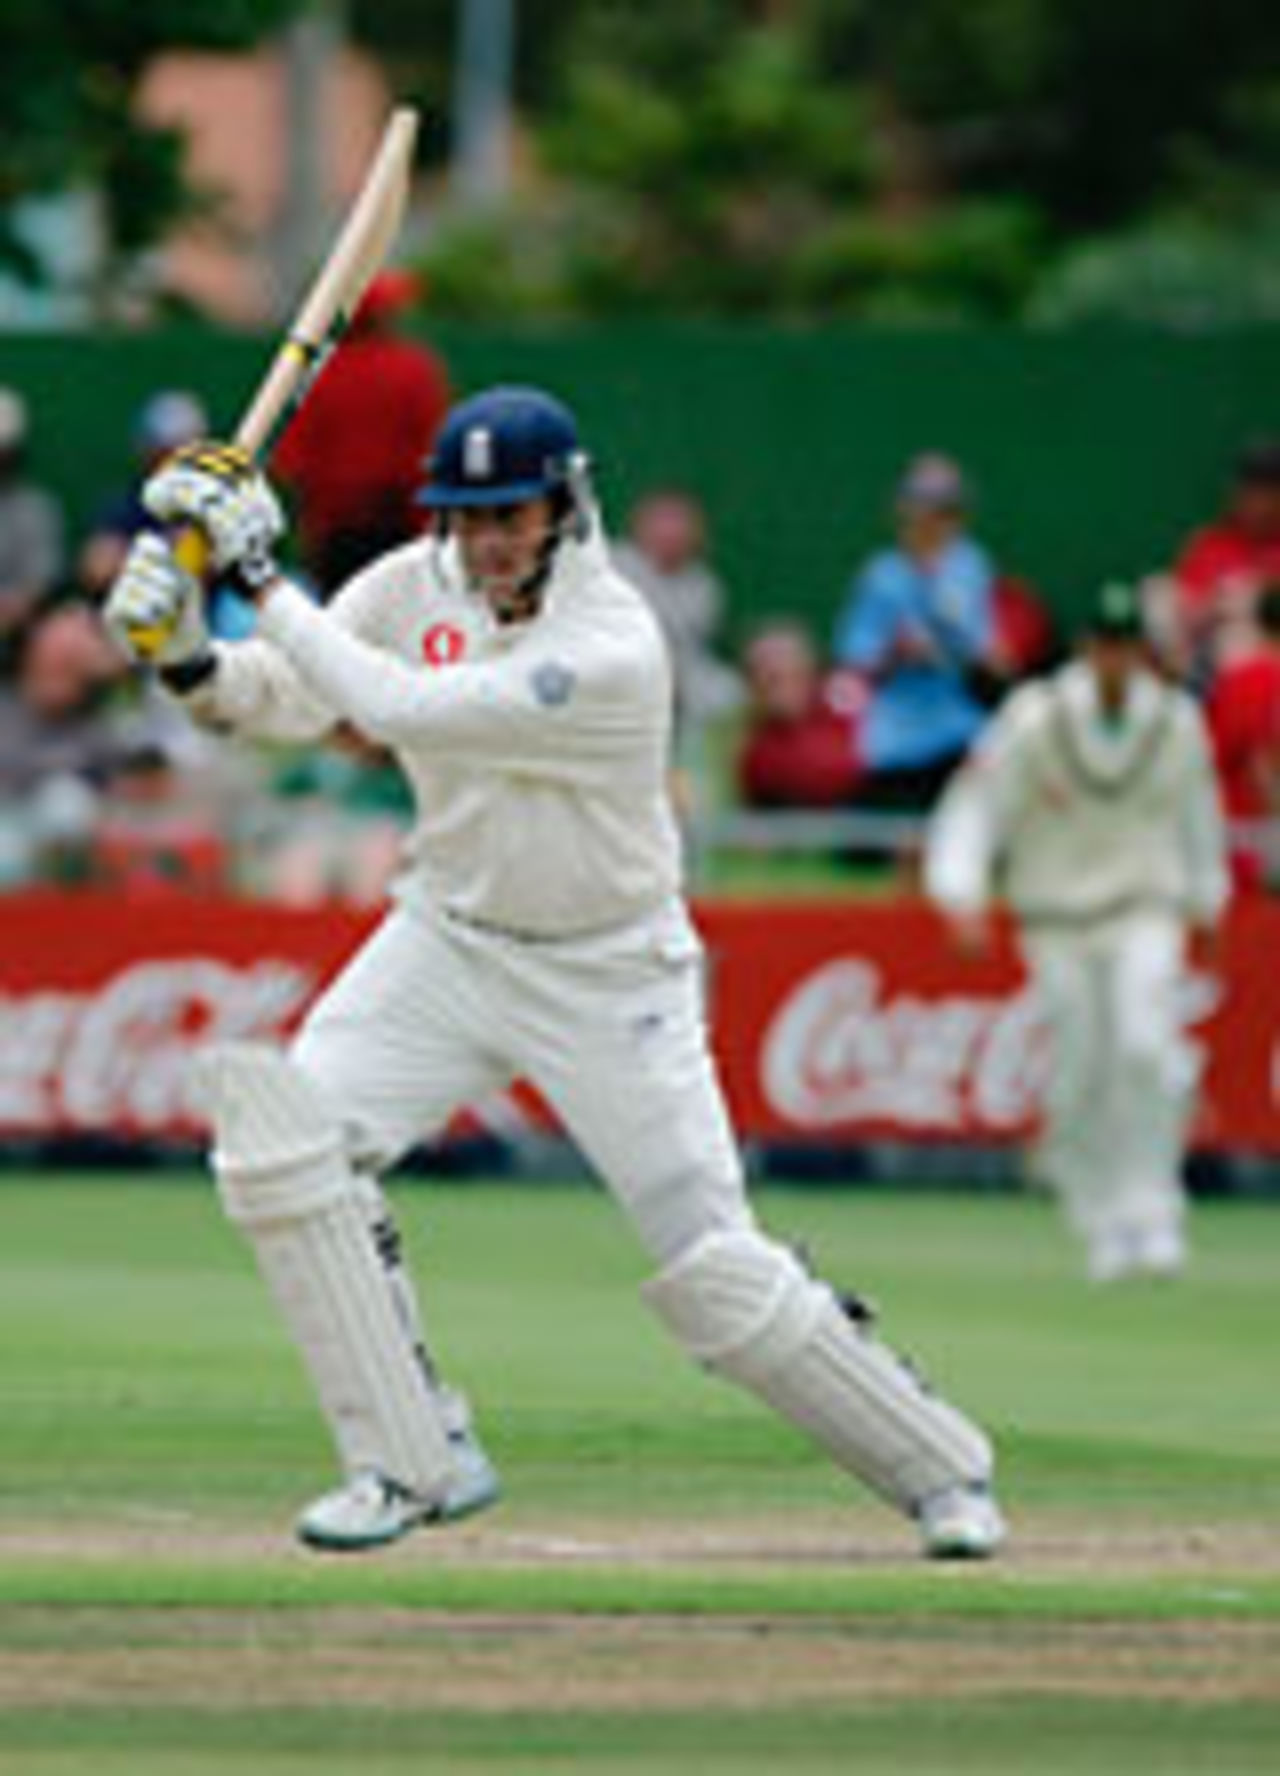 Marcus Trescothick clubbing the ball, second day, South Africa v England, 1st Test, Port Elizabeth, December 18 2004